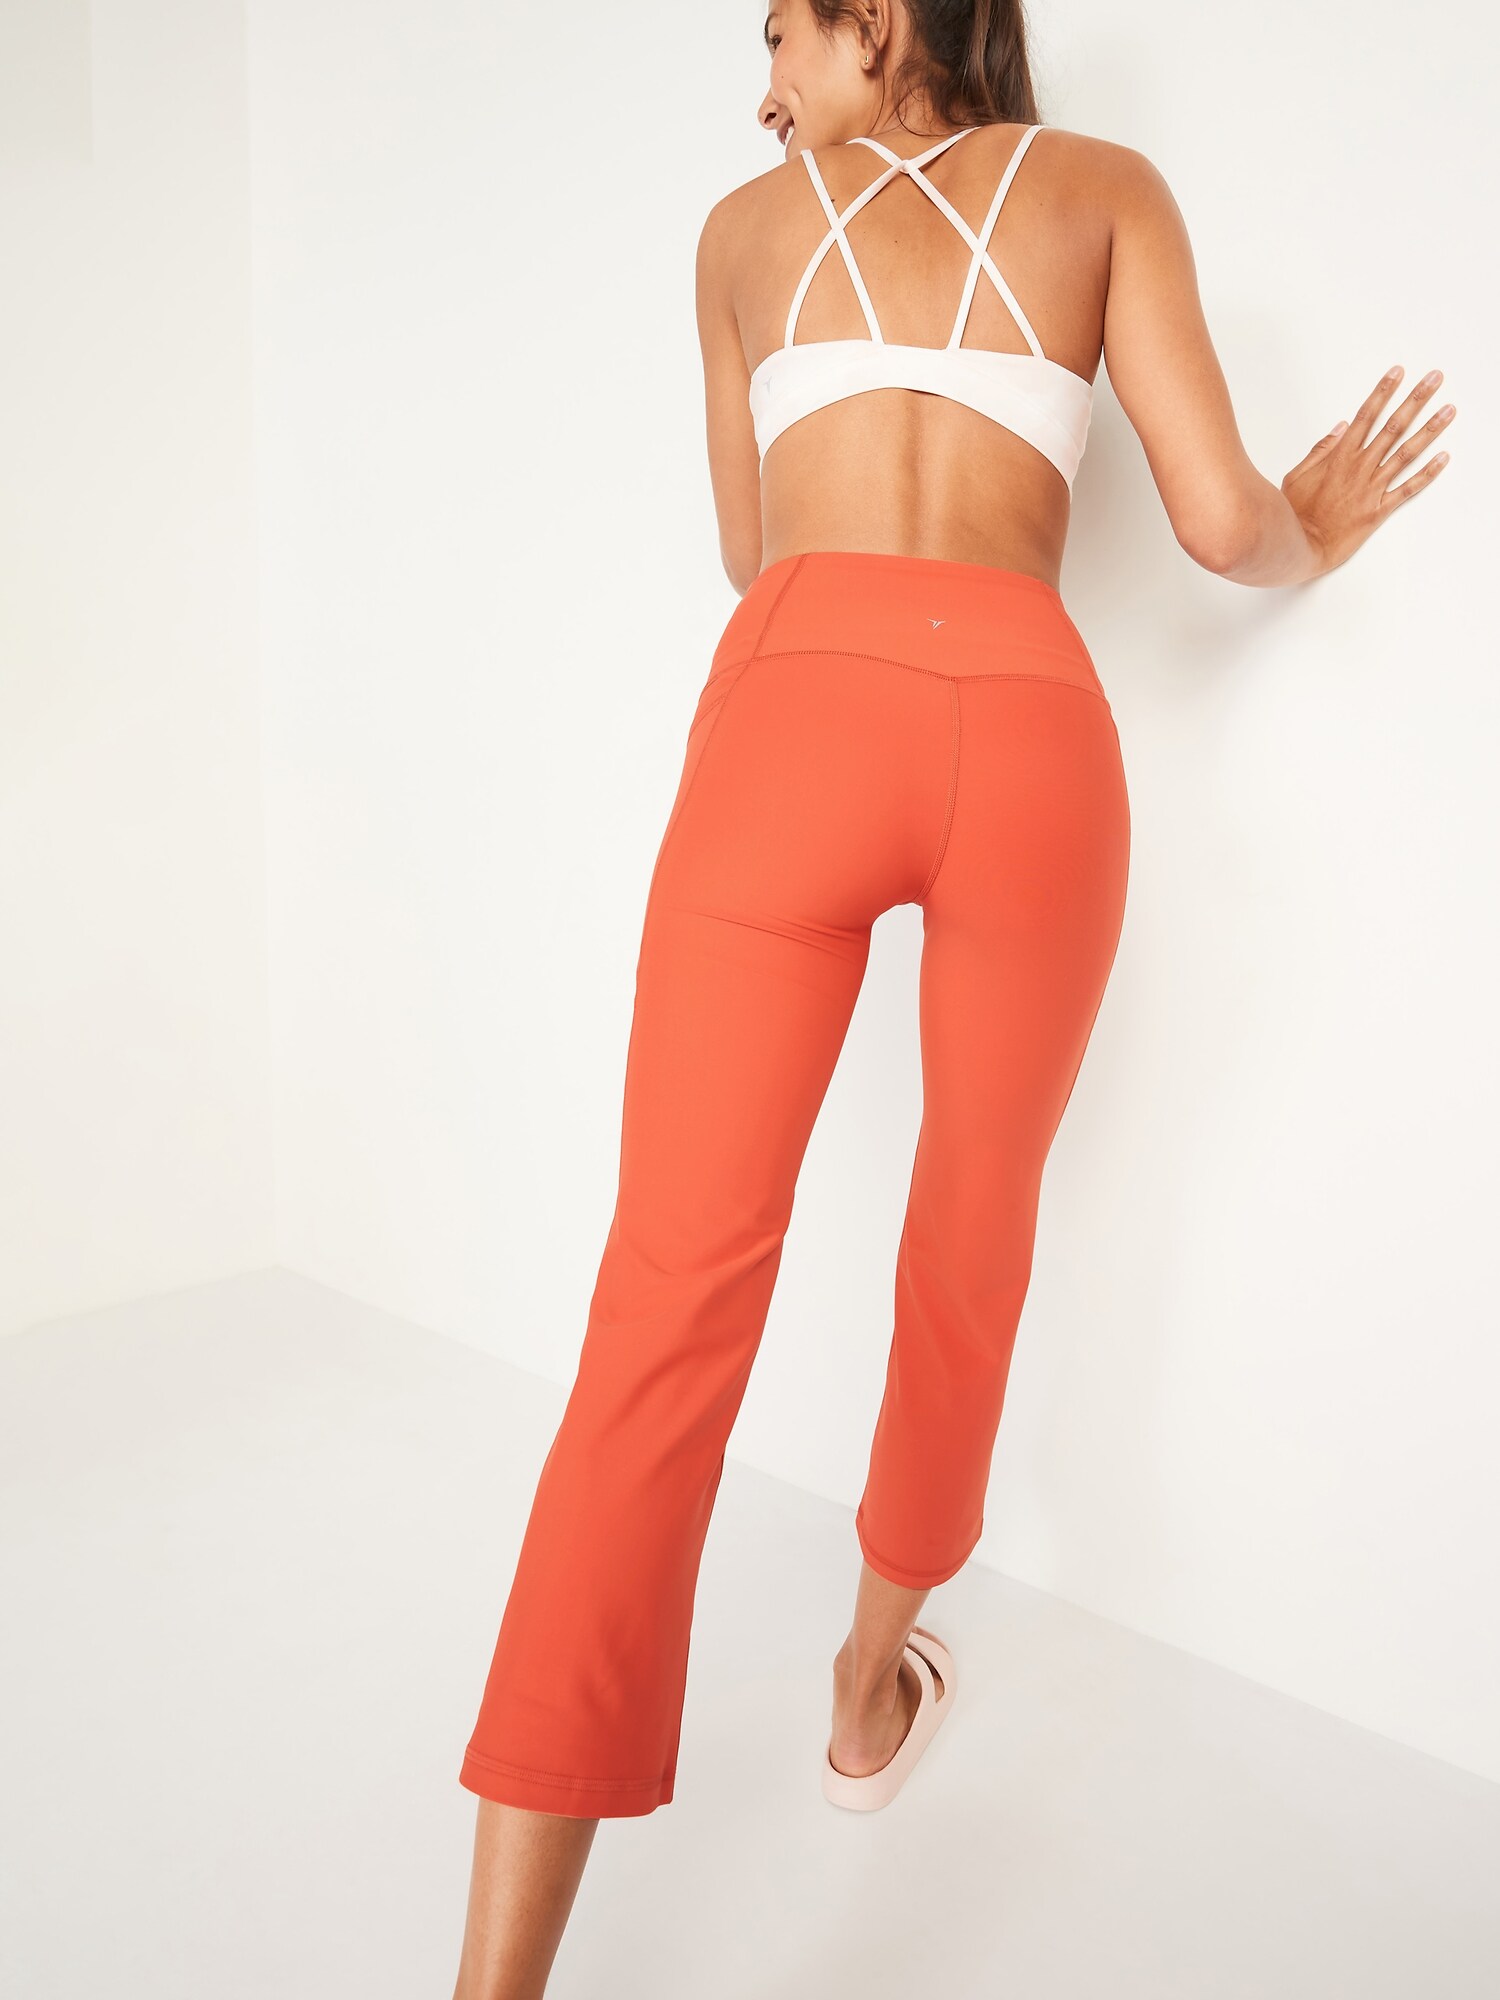 Old Navy High-Waisted PowerSoft Slim Flare Pants